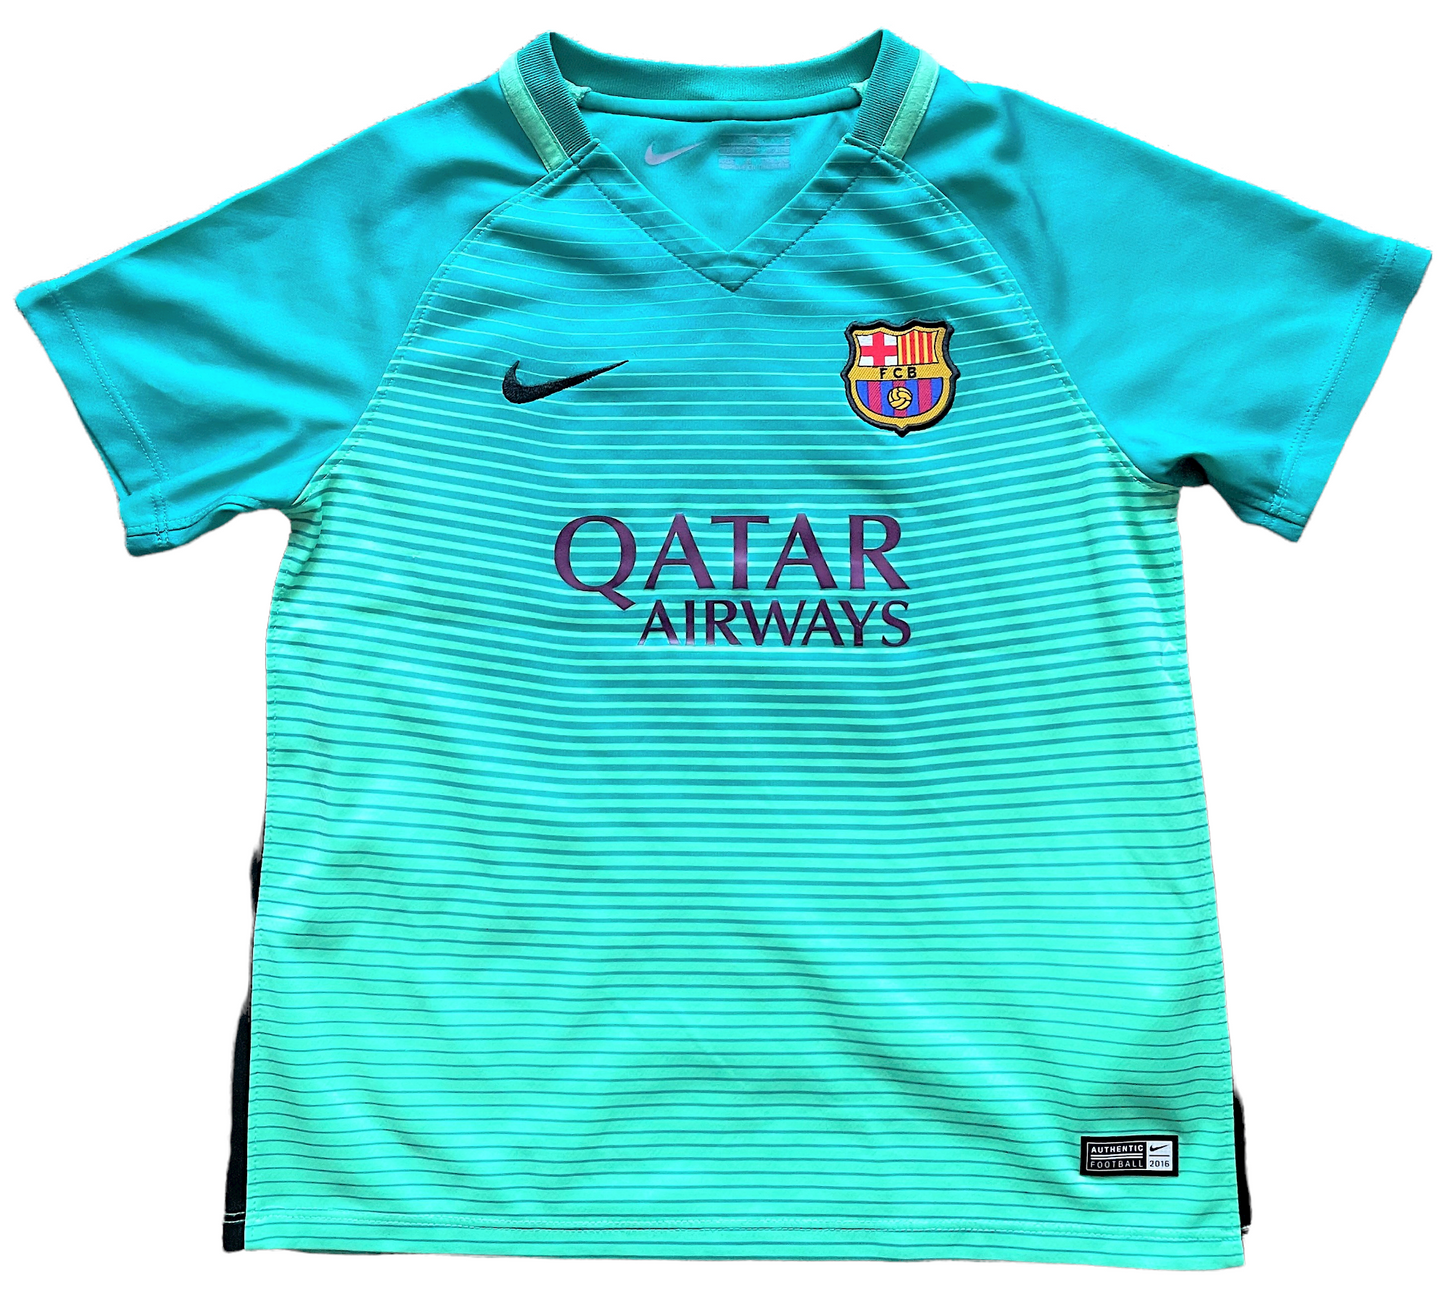 2016-17 Barcelona Away Shirt (excellent) Age 6 to 7